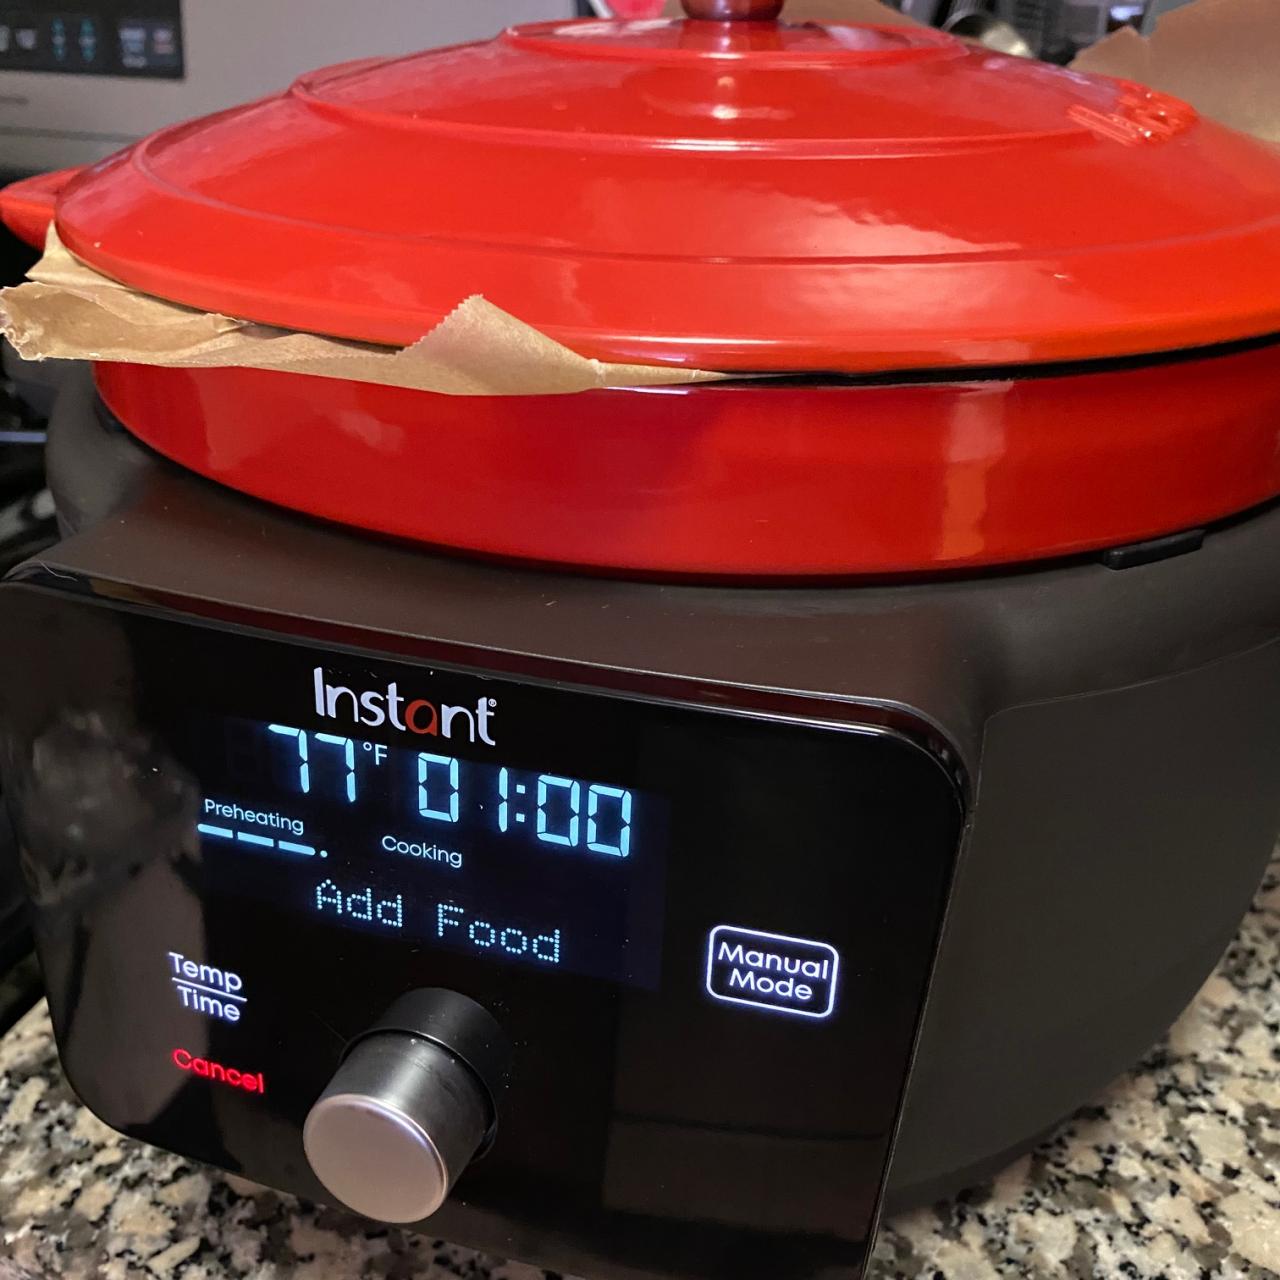 What is better, a Dutch oven or an instant pot? - Quora